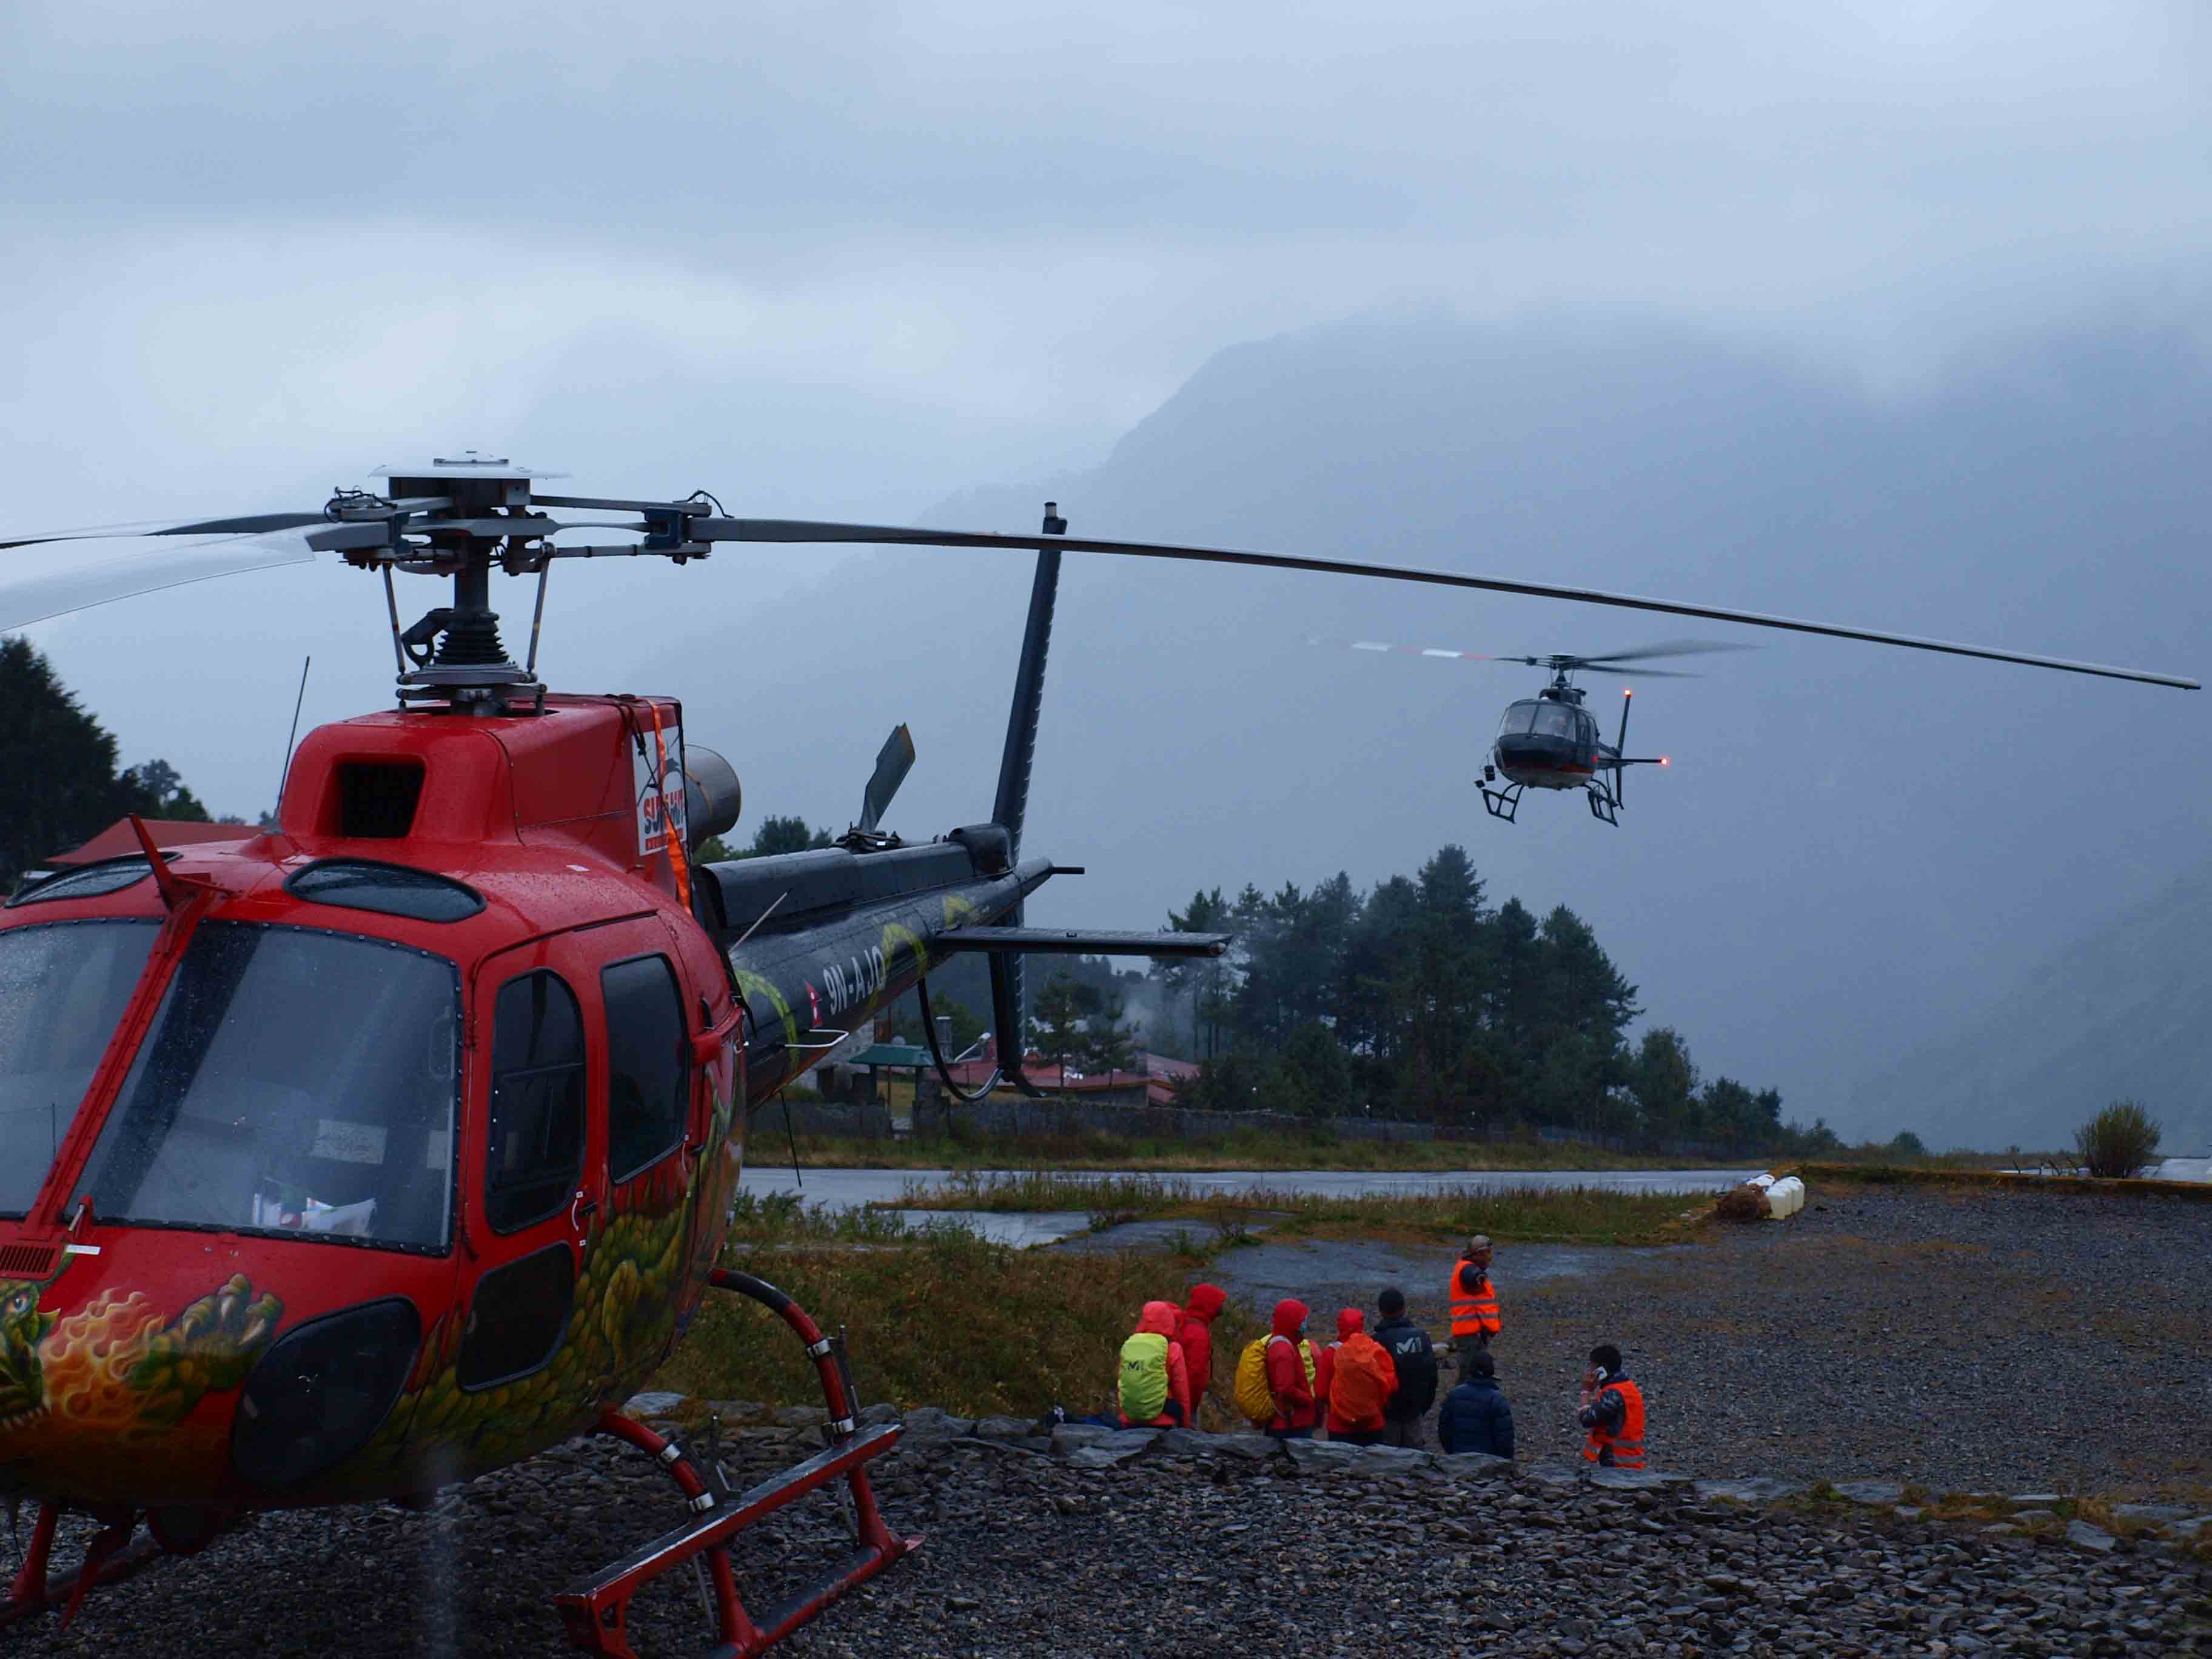 Helicopter arriving and people getting ready to board nepal lukla